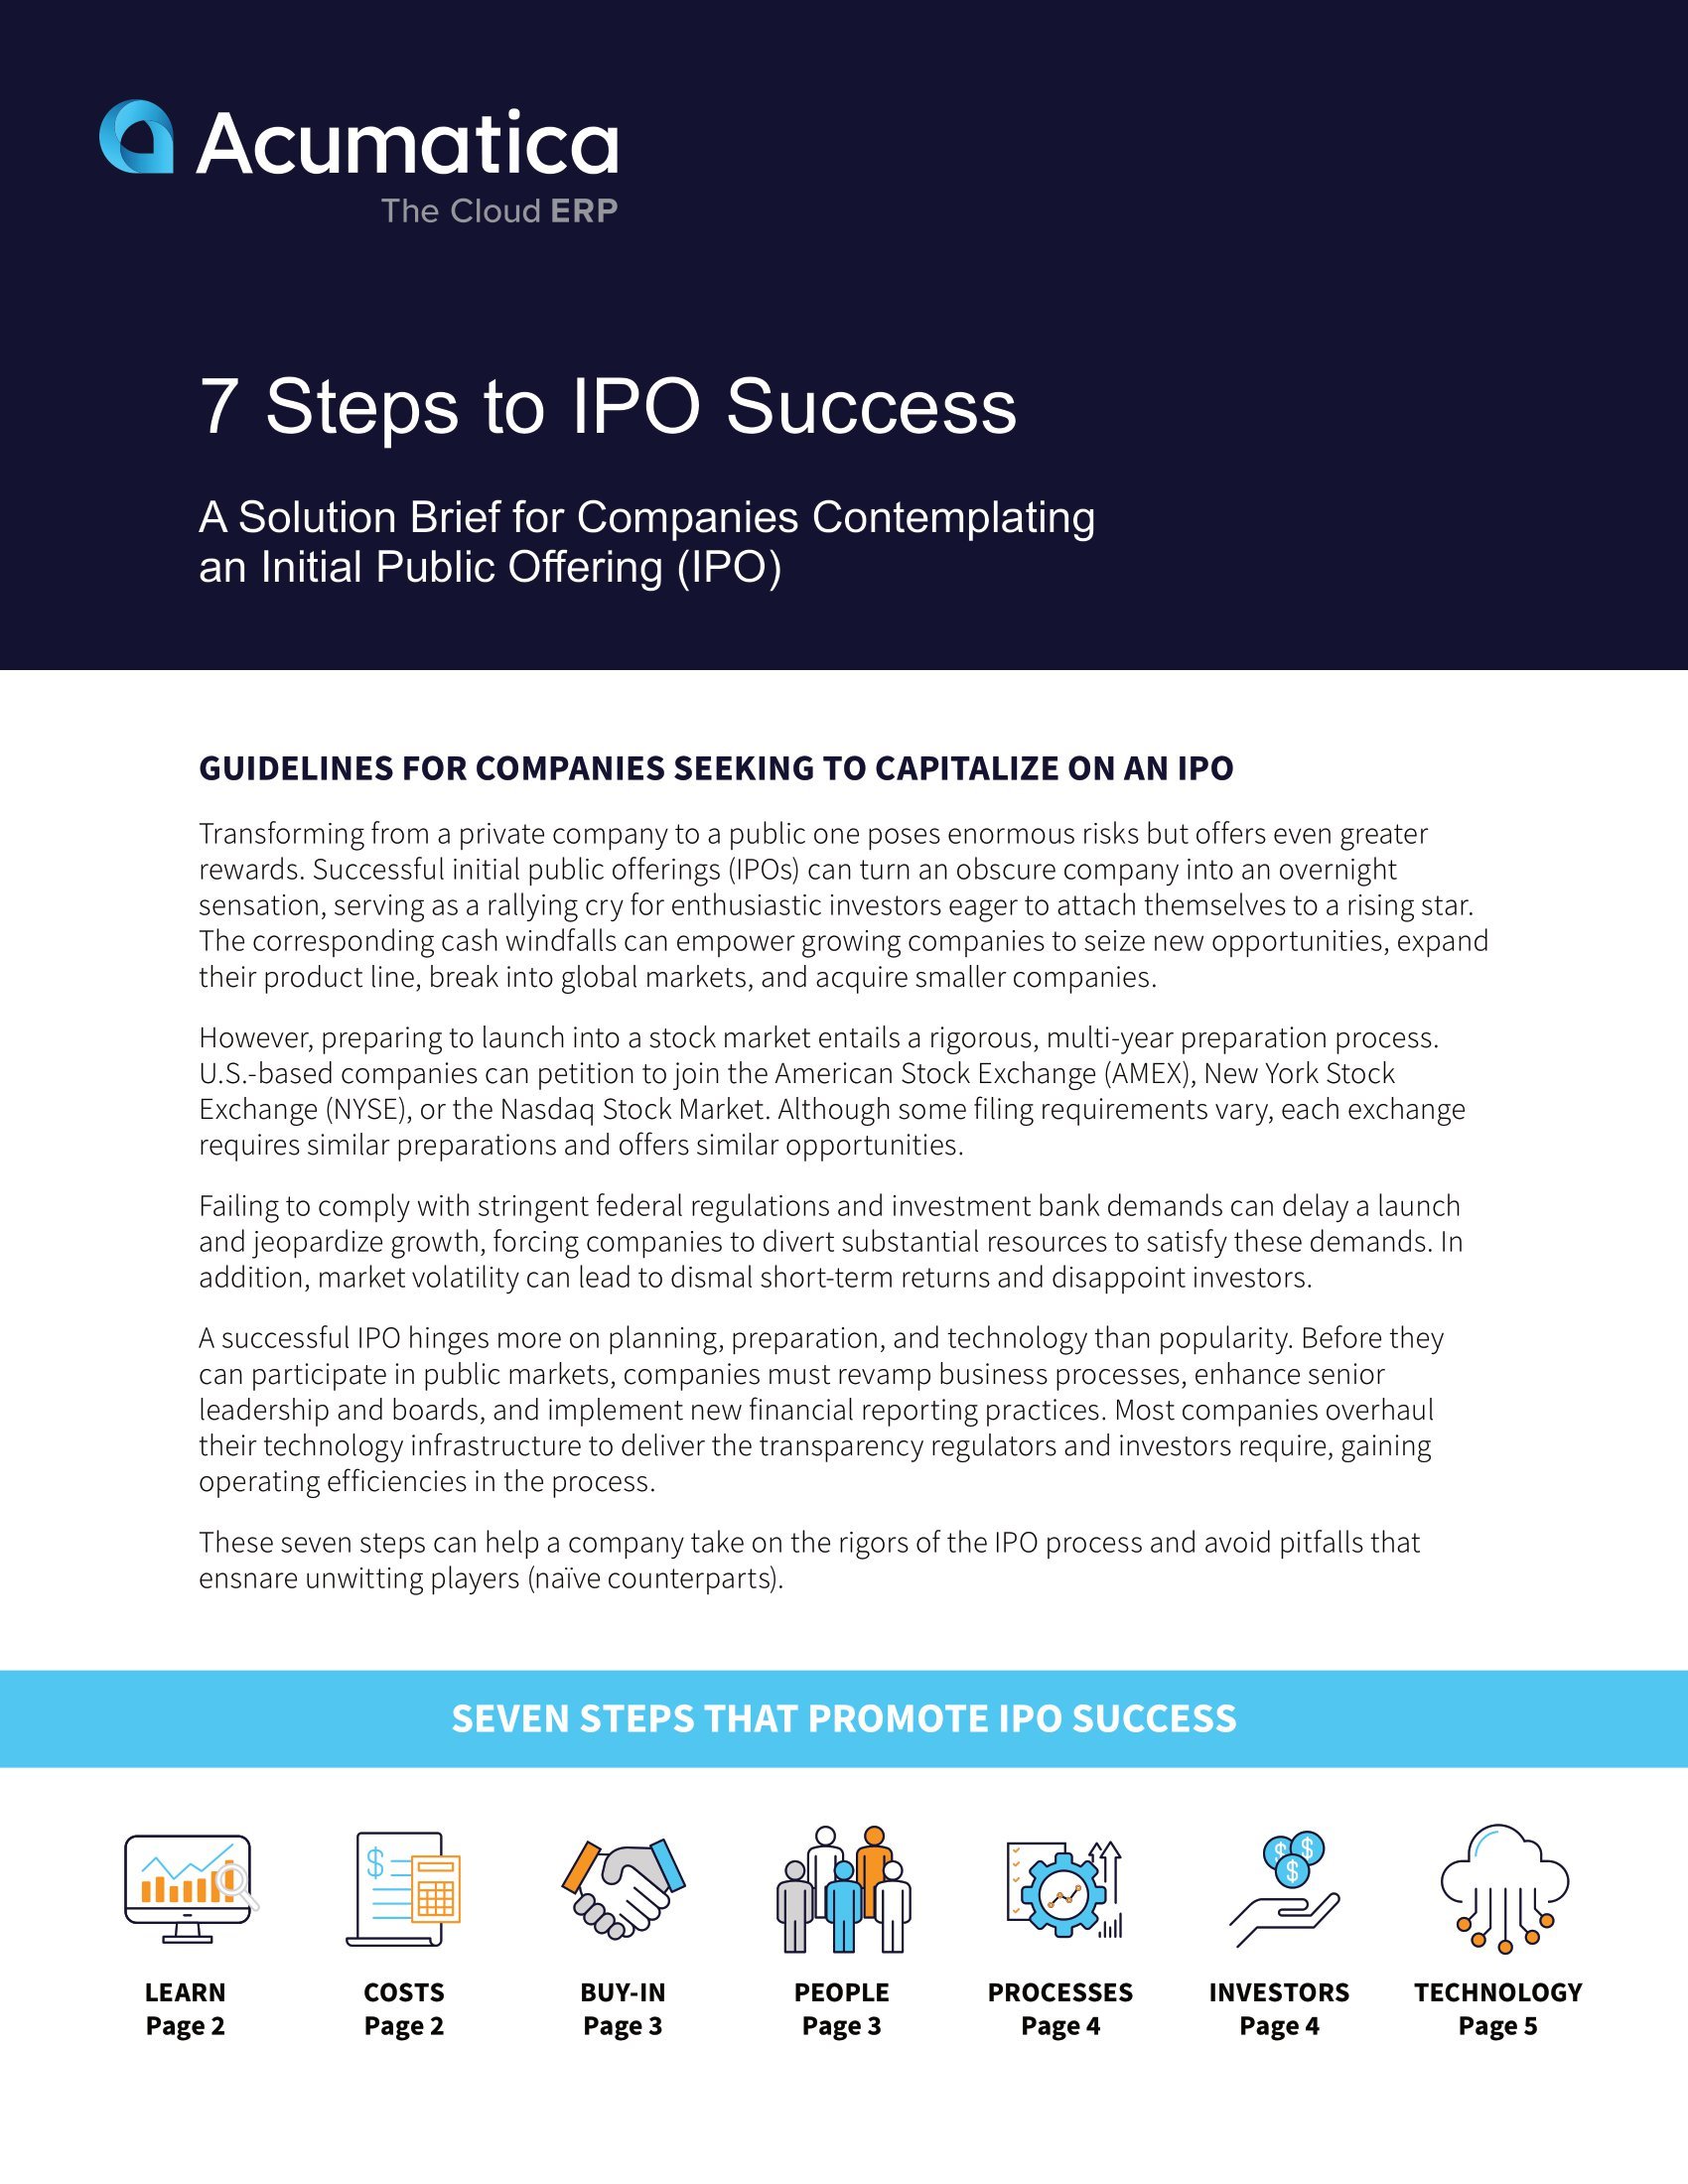 Guidelines to IPO Success for Companies Contemplating Going Public